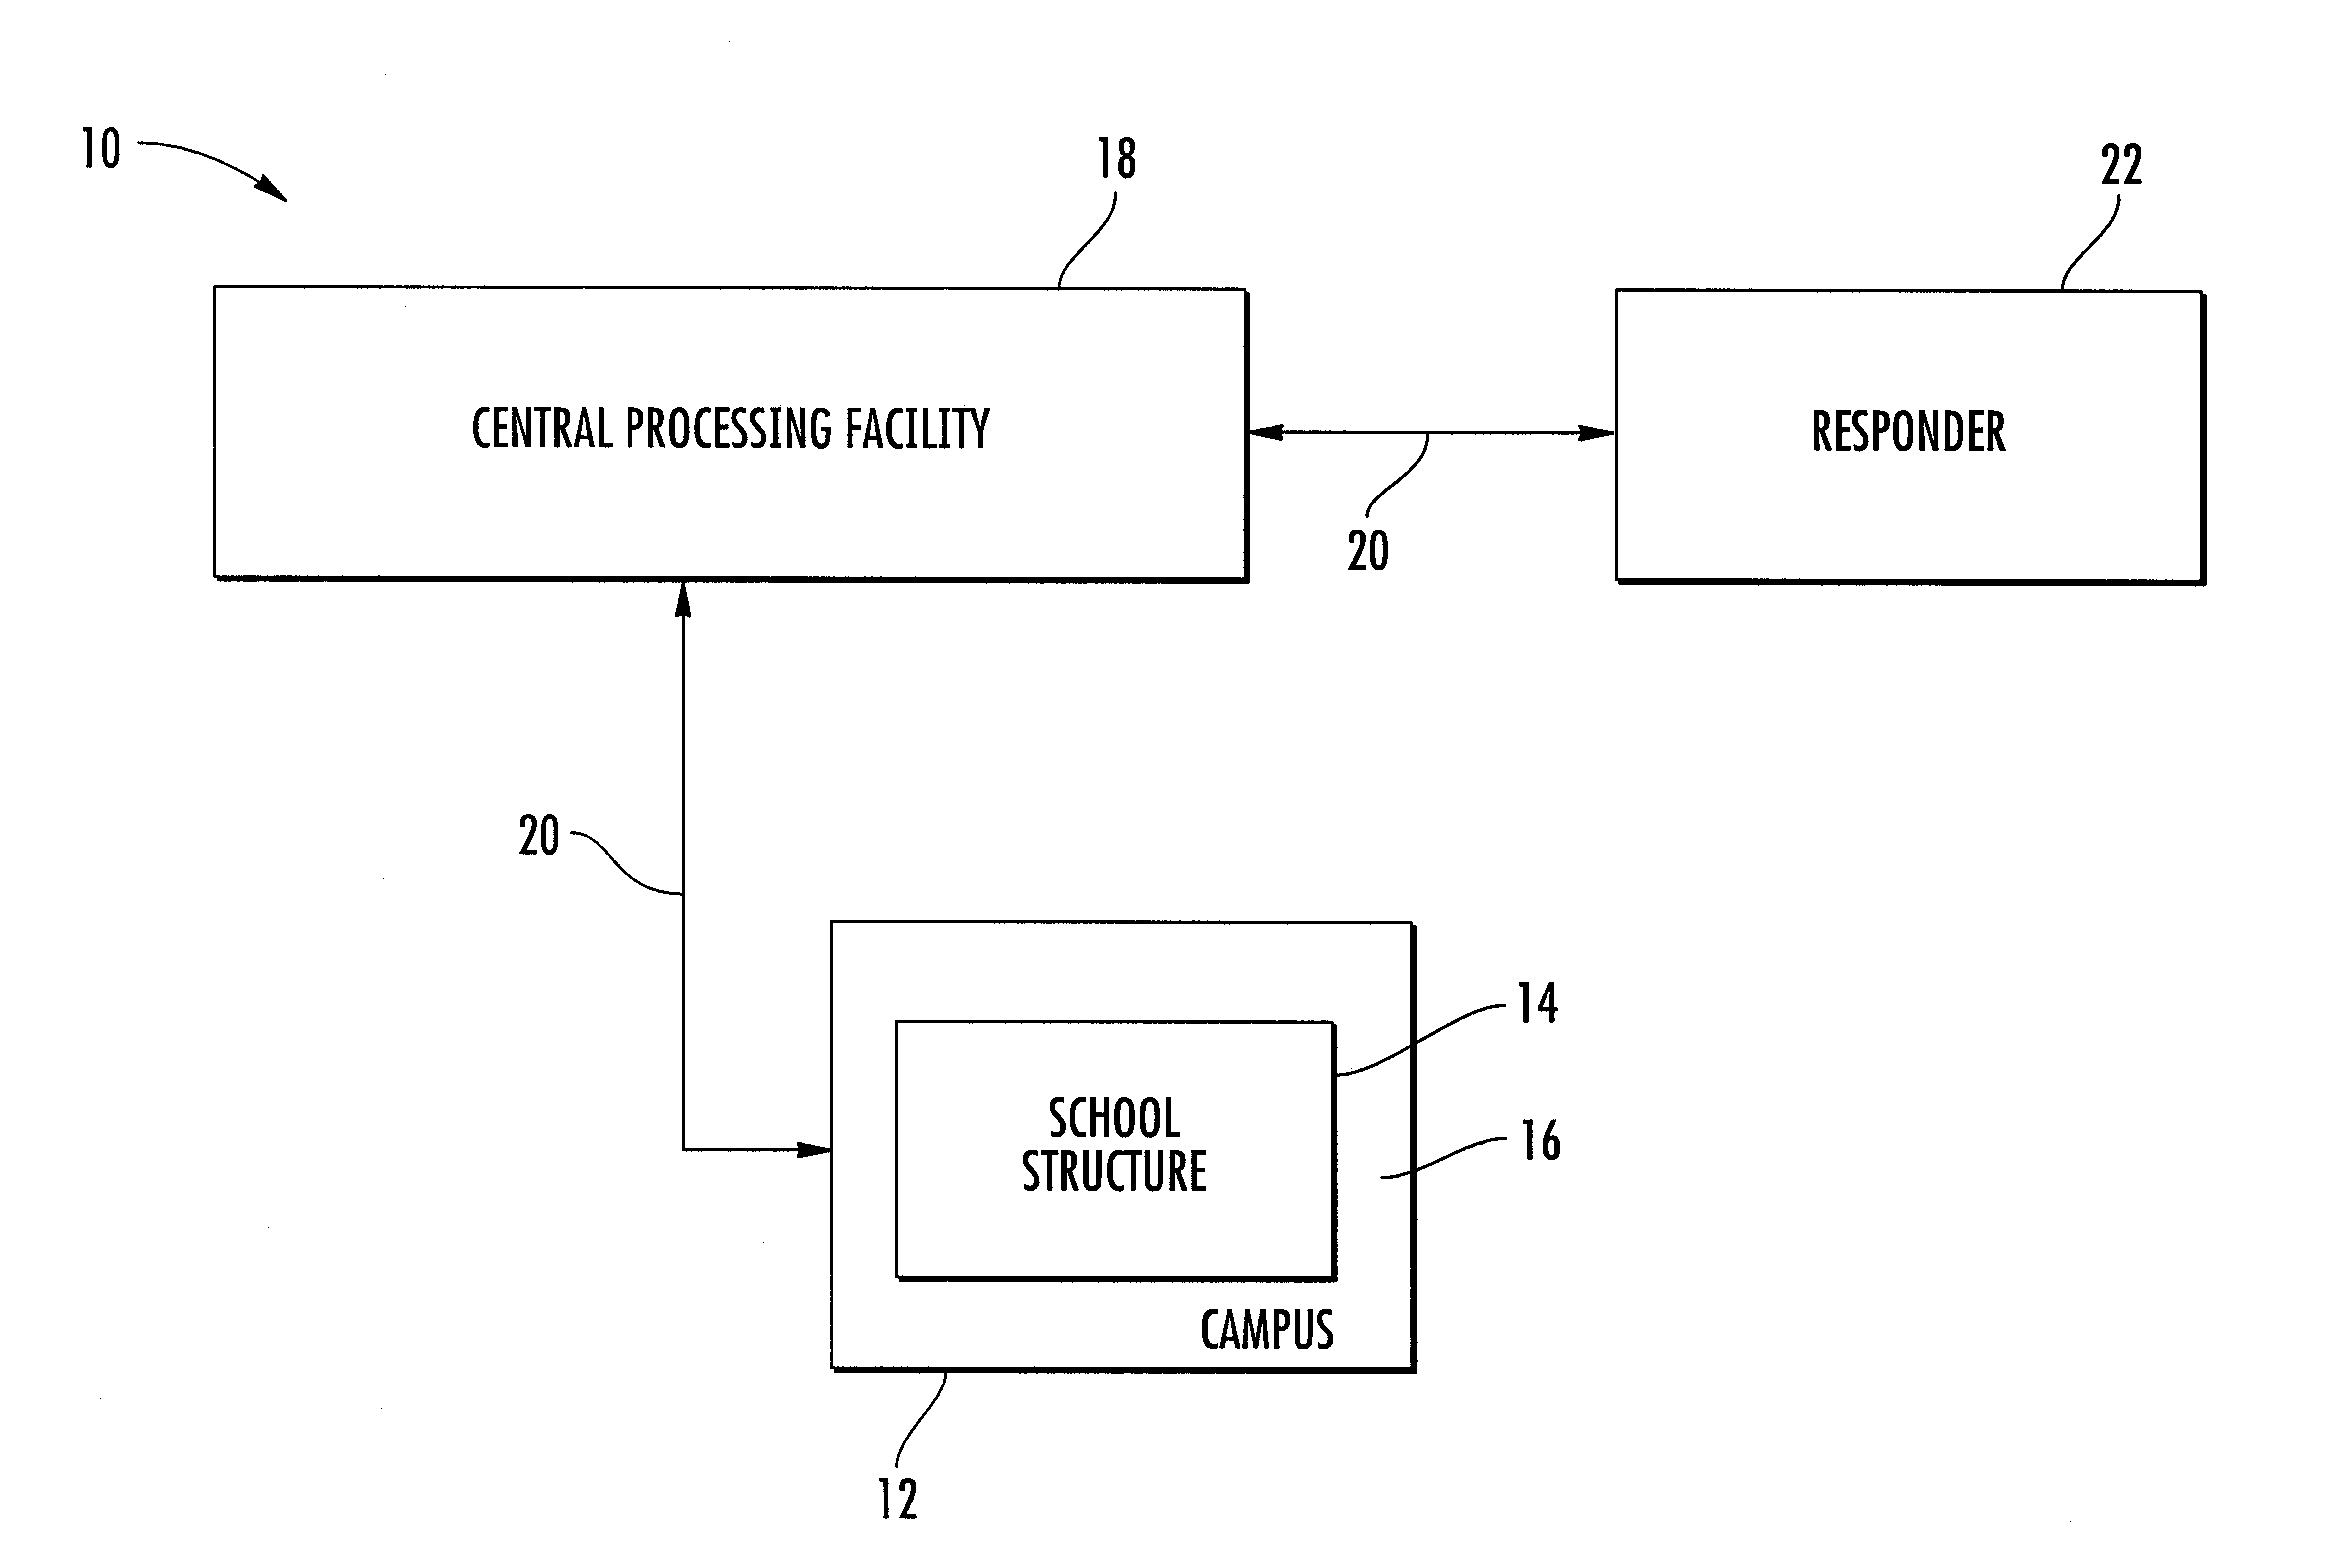 Systems and methods for monitoring and tracking emergency events within a defined area